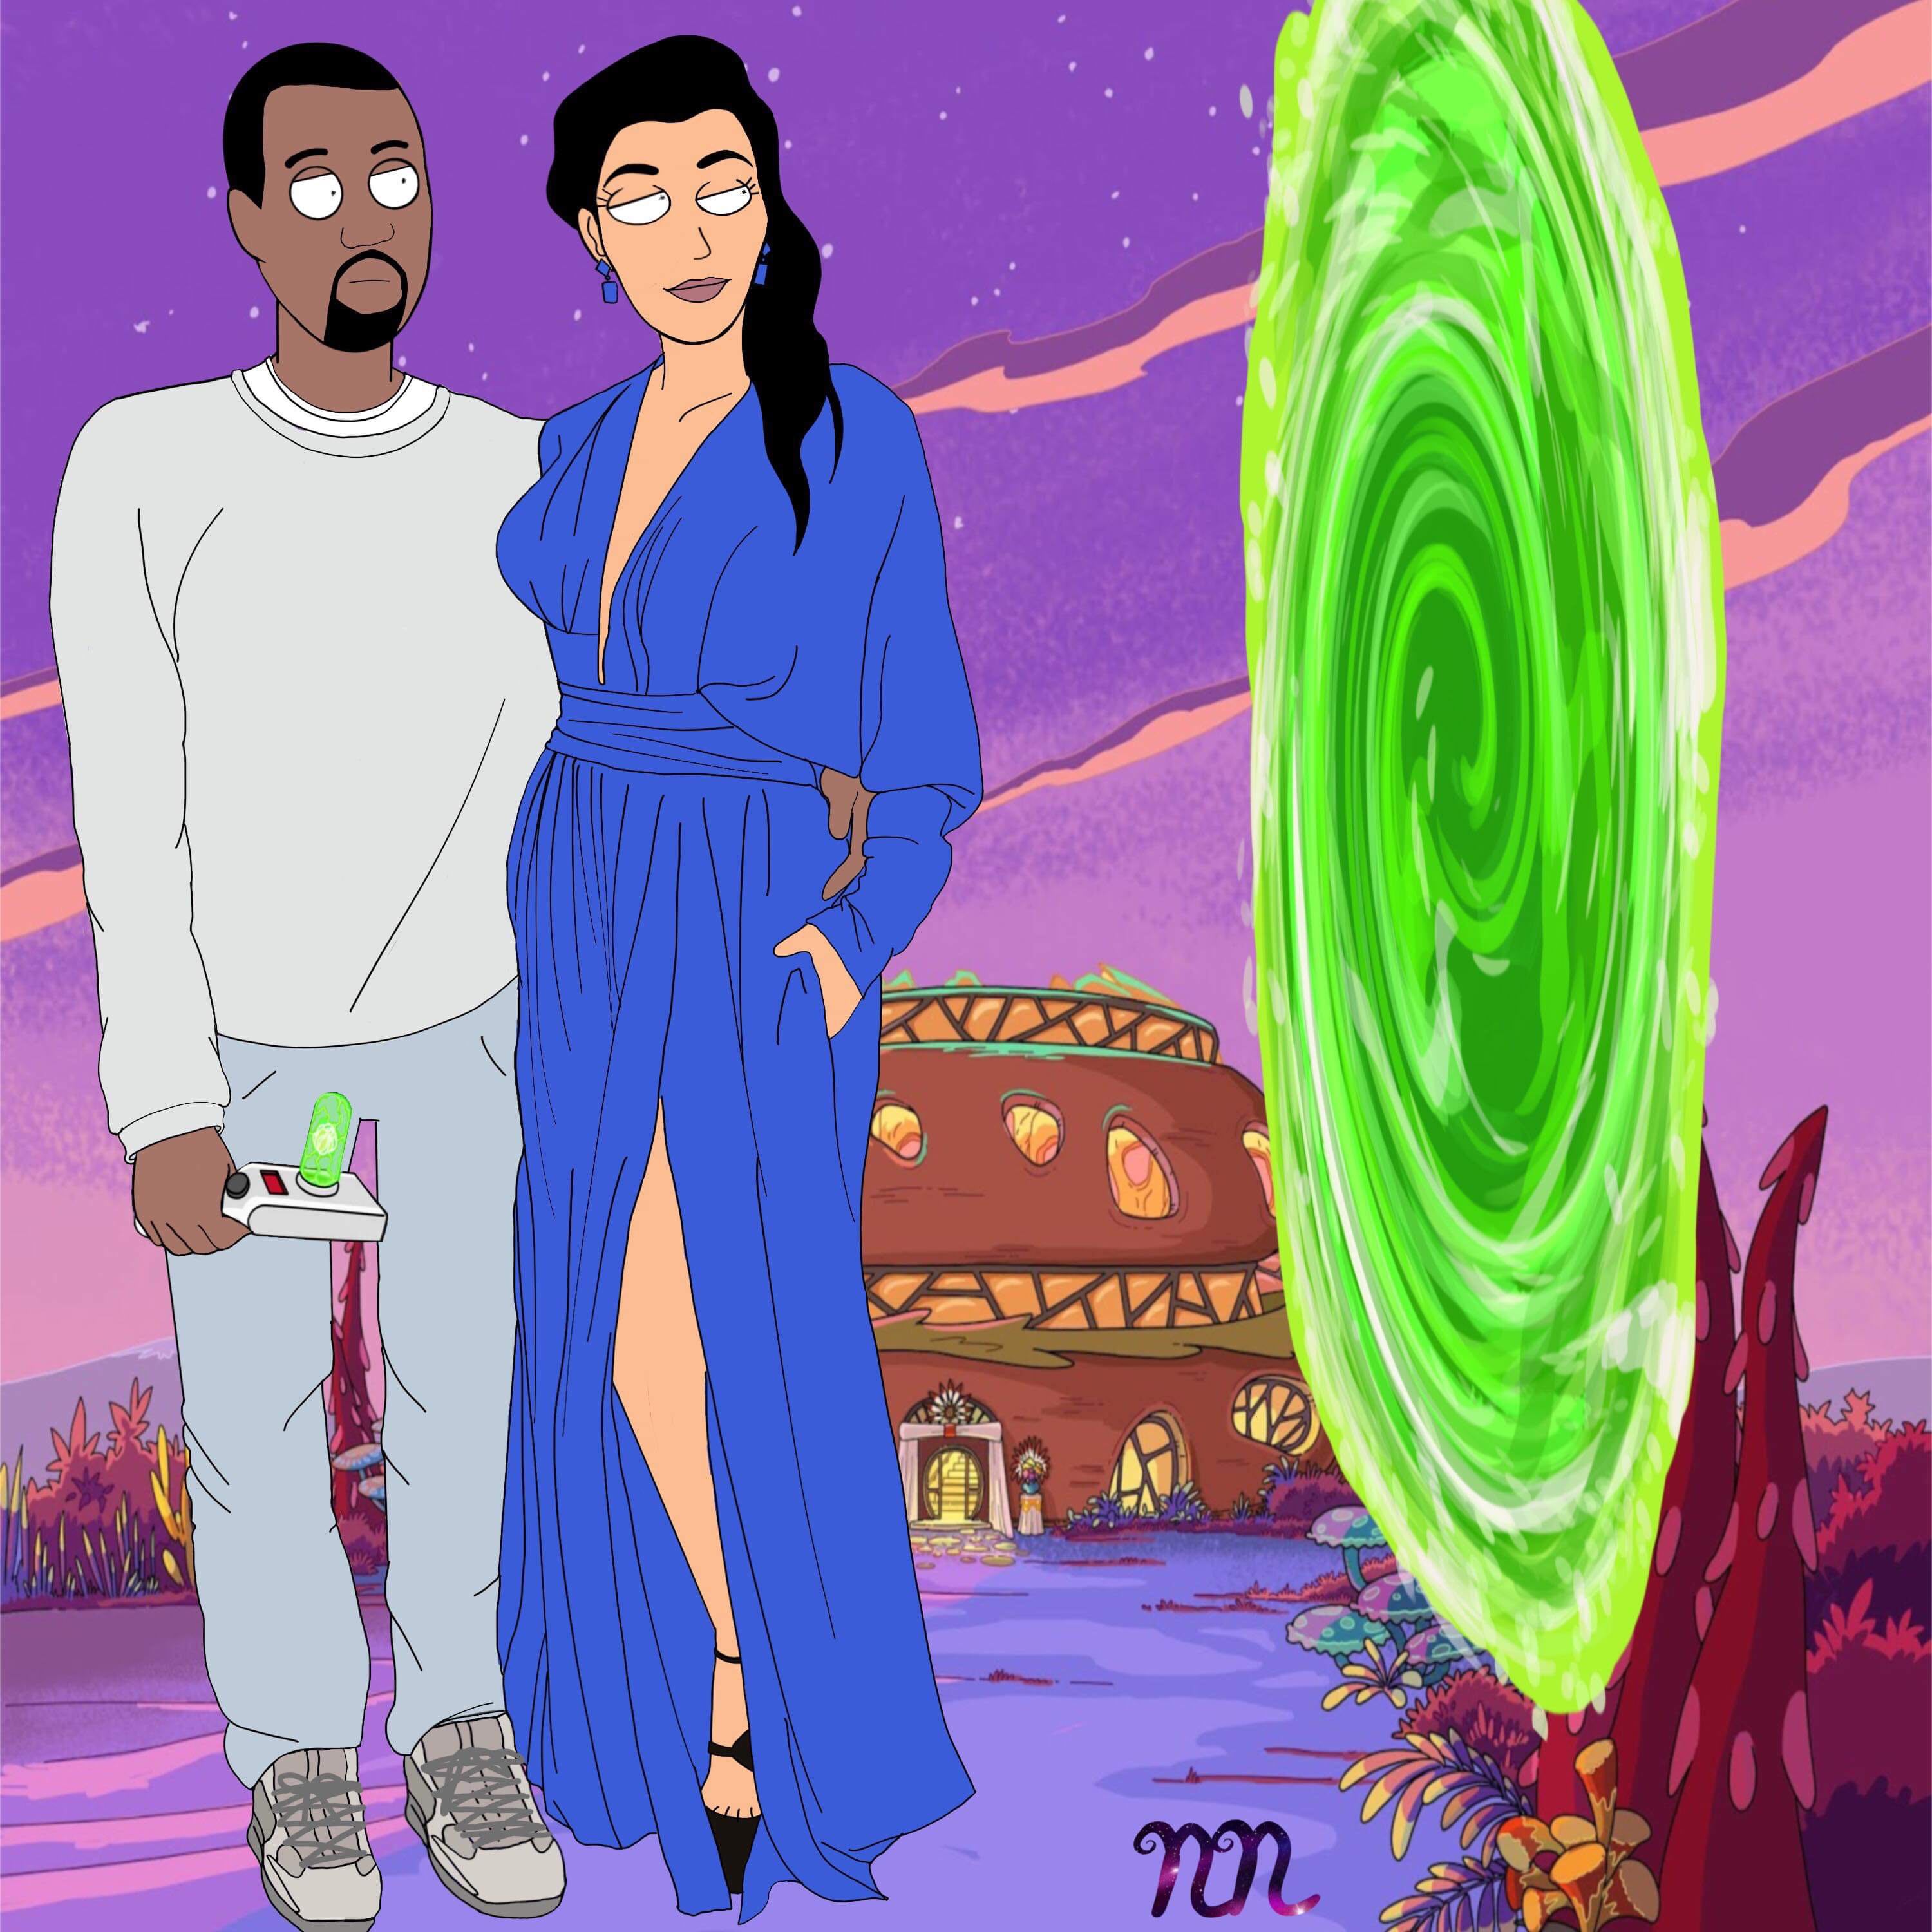 kanye-west-rick-and-morty-3